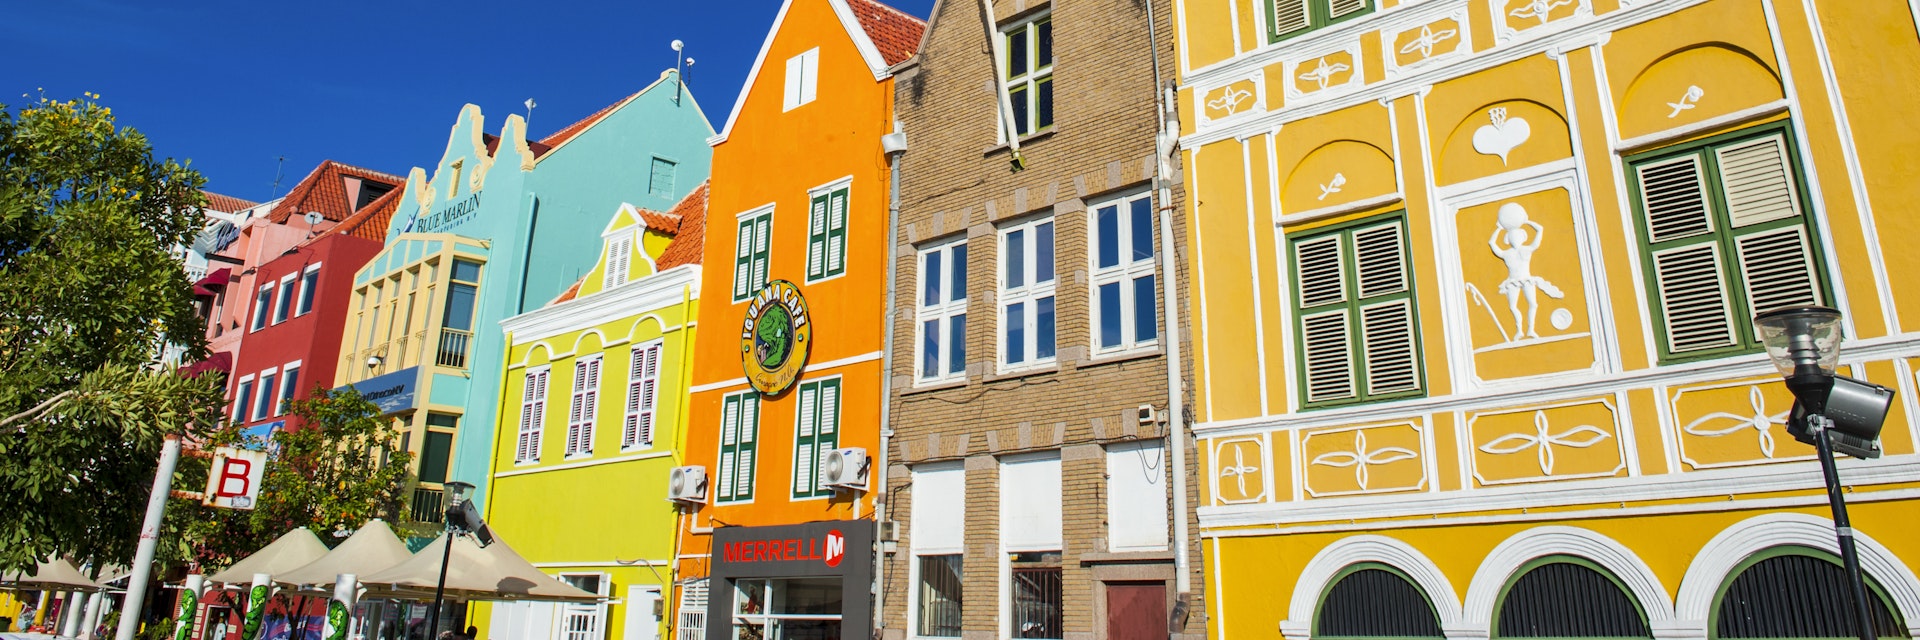 The colourful Dutch houses at the Sint Annabaai in Willemstad, UNESCO World Heritage Site, Curacao, ABC Islands, Netherlands Antilles, Caribbean, Central America